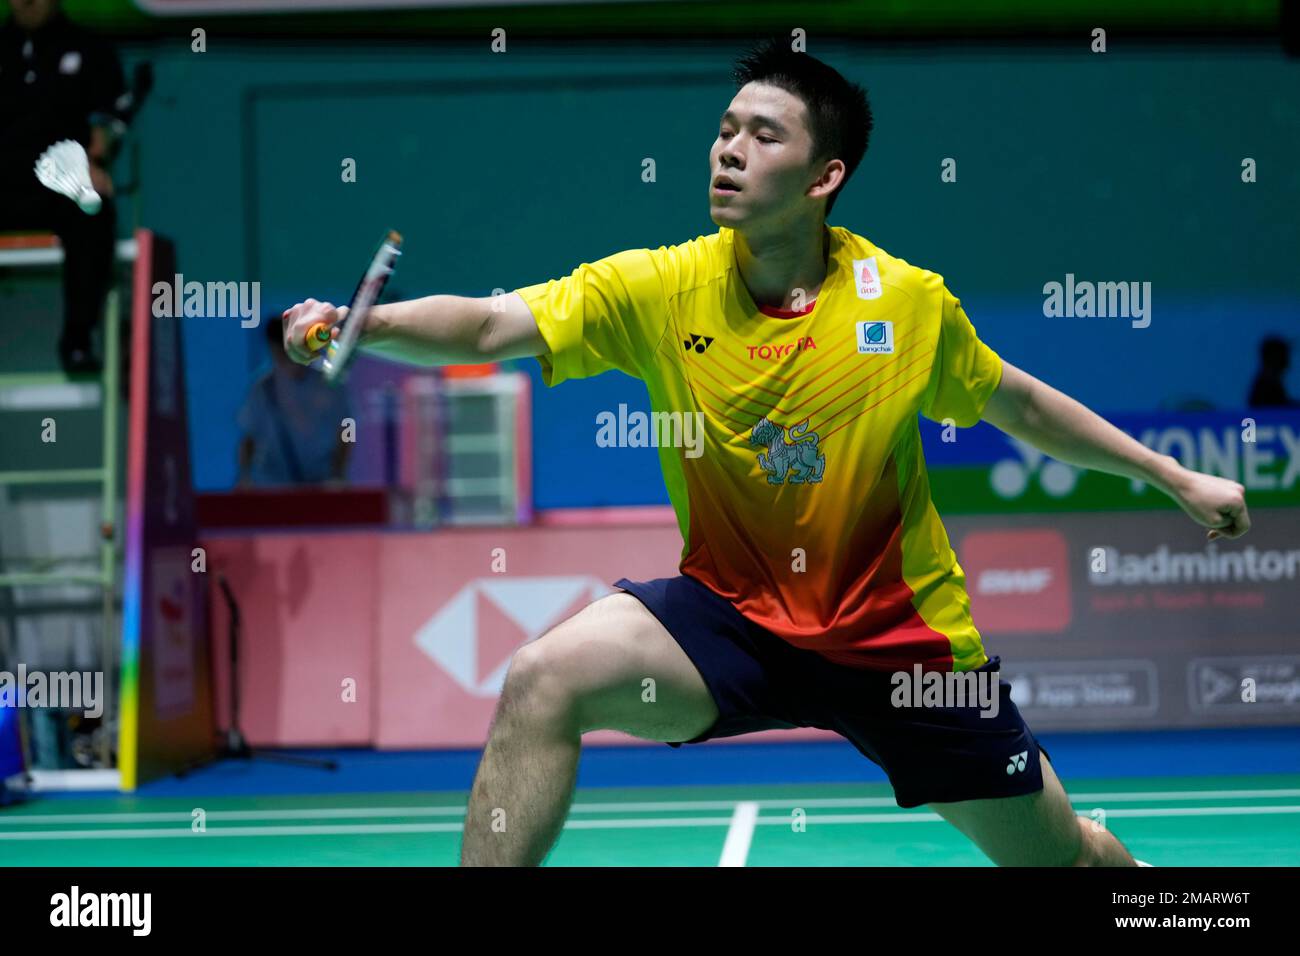 Kunlavut Vitidsarn of Thailand plays a return against Tommy Sugiarto of  Indonesia during a badminton game of the men's singles in the BWF World  Championships in Tokyo, Monday, Aug. 22, 2022. (AP